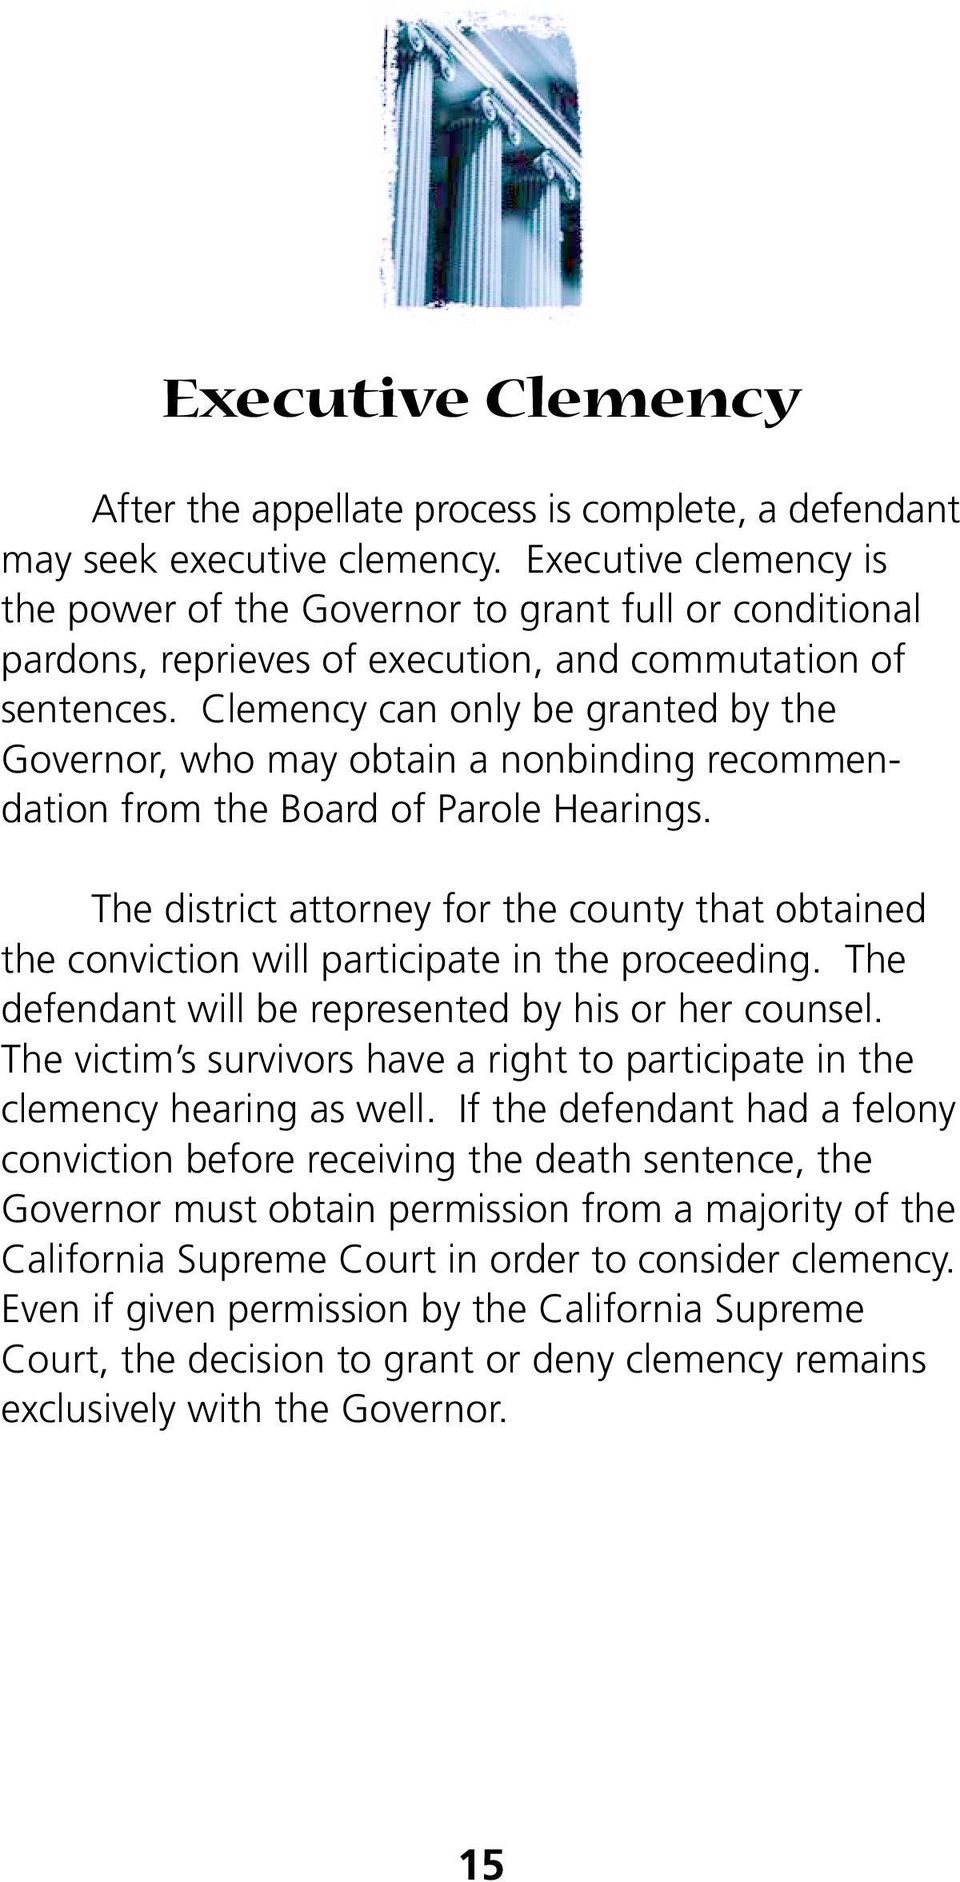 Clemency can only be granted by the Governor, who may obtain a nonbinding recommendation from the Board of Parole Hearings.